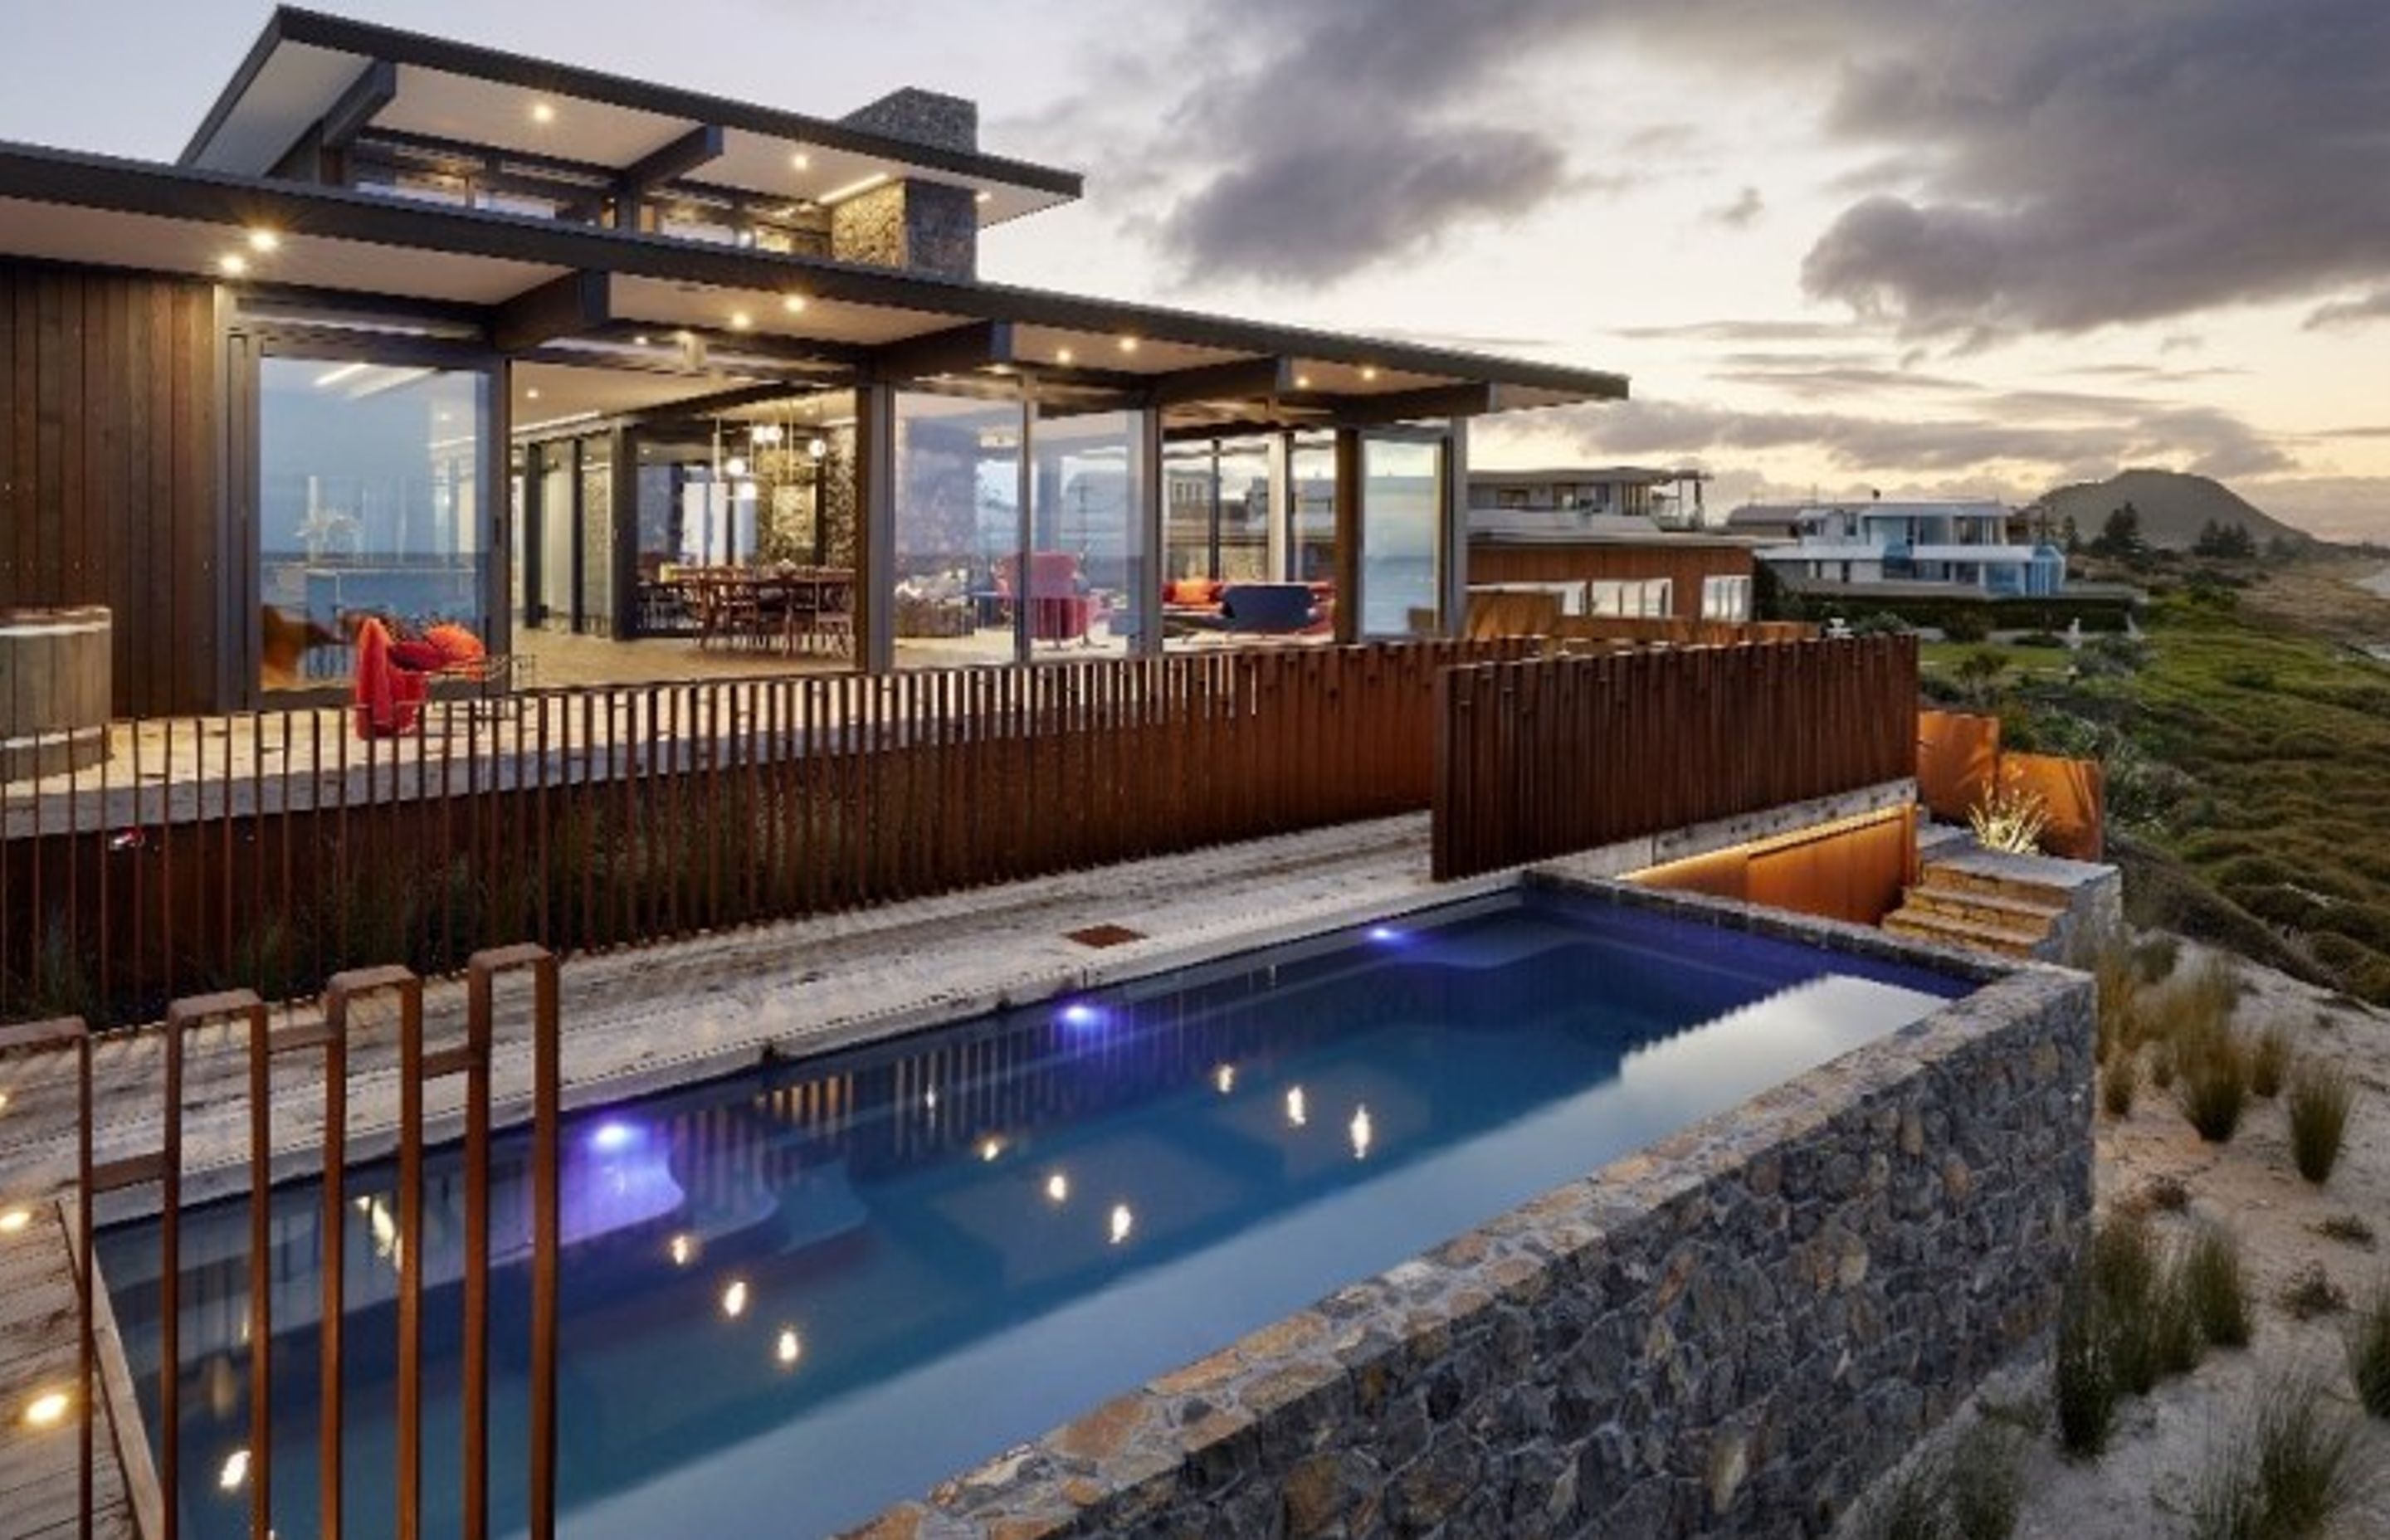 HOW MUCH DO ABOVE GROUND POOLS COST?